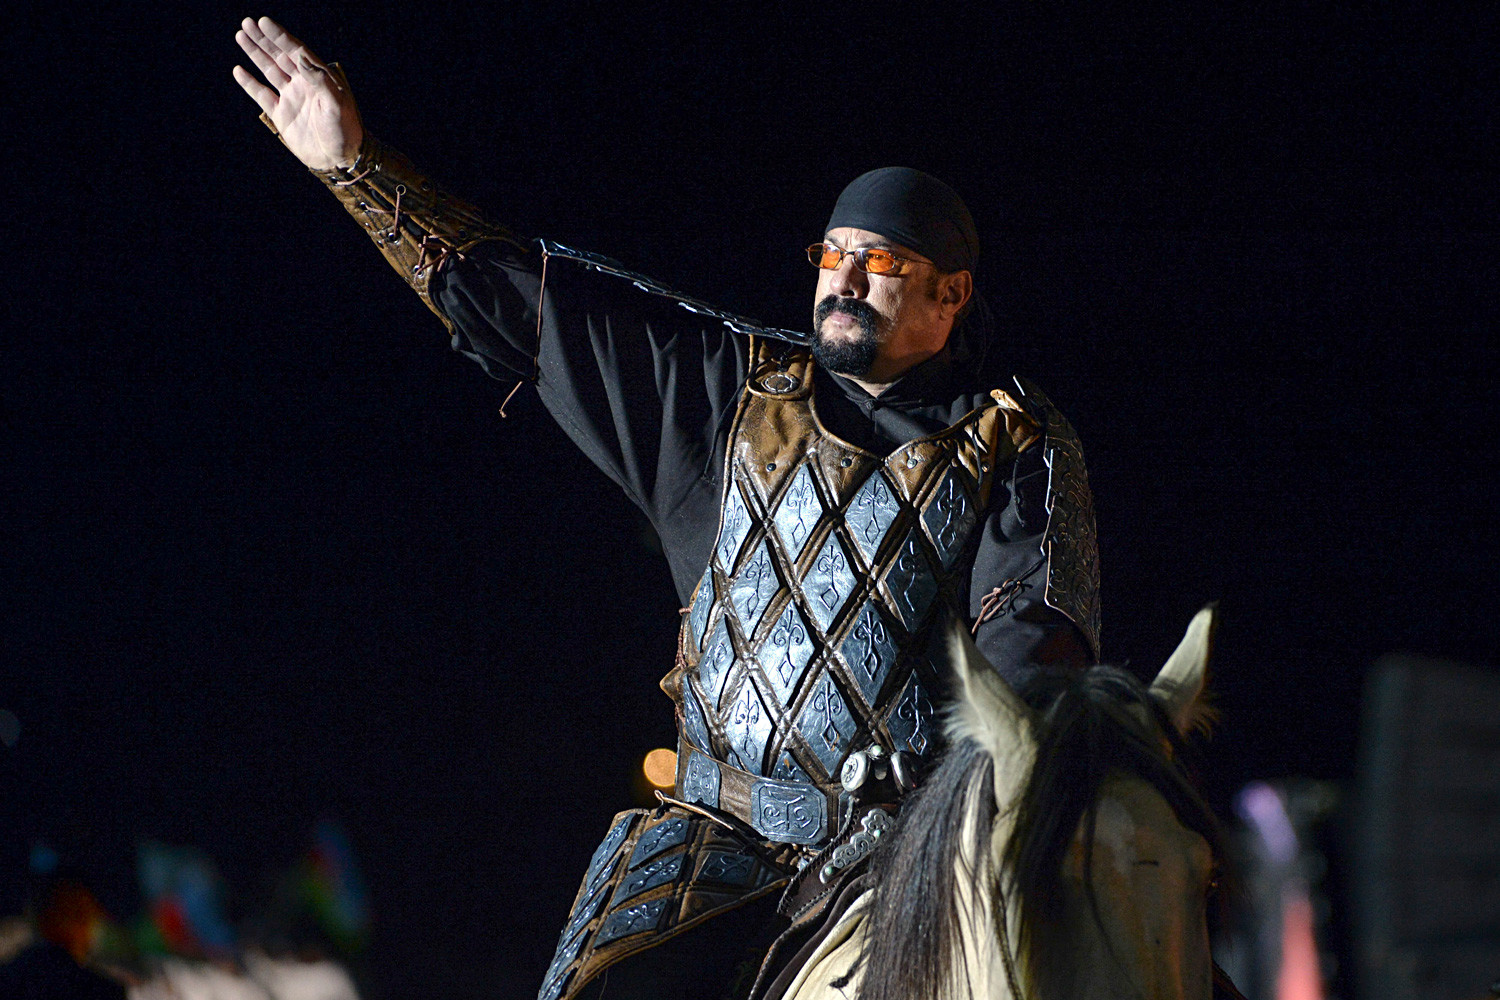 According to media reports, Seagal considered making in Russia a movie about Genghis Khan